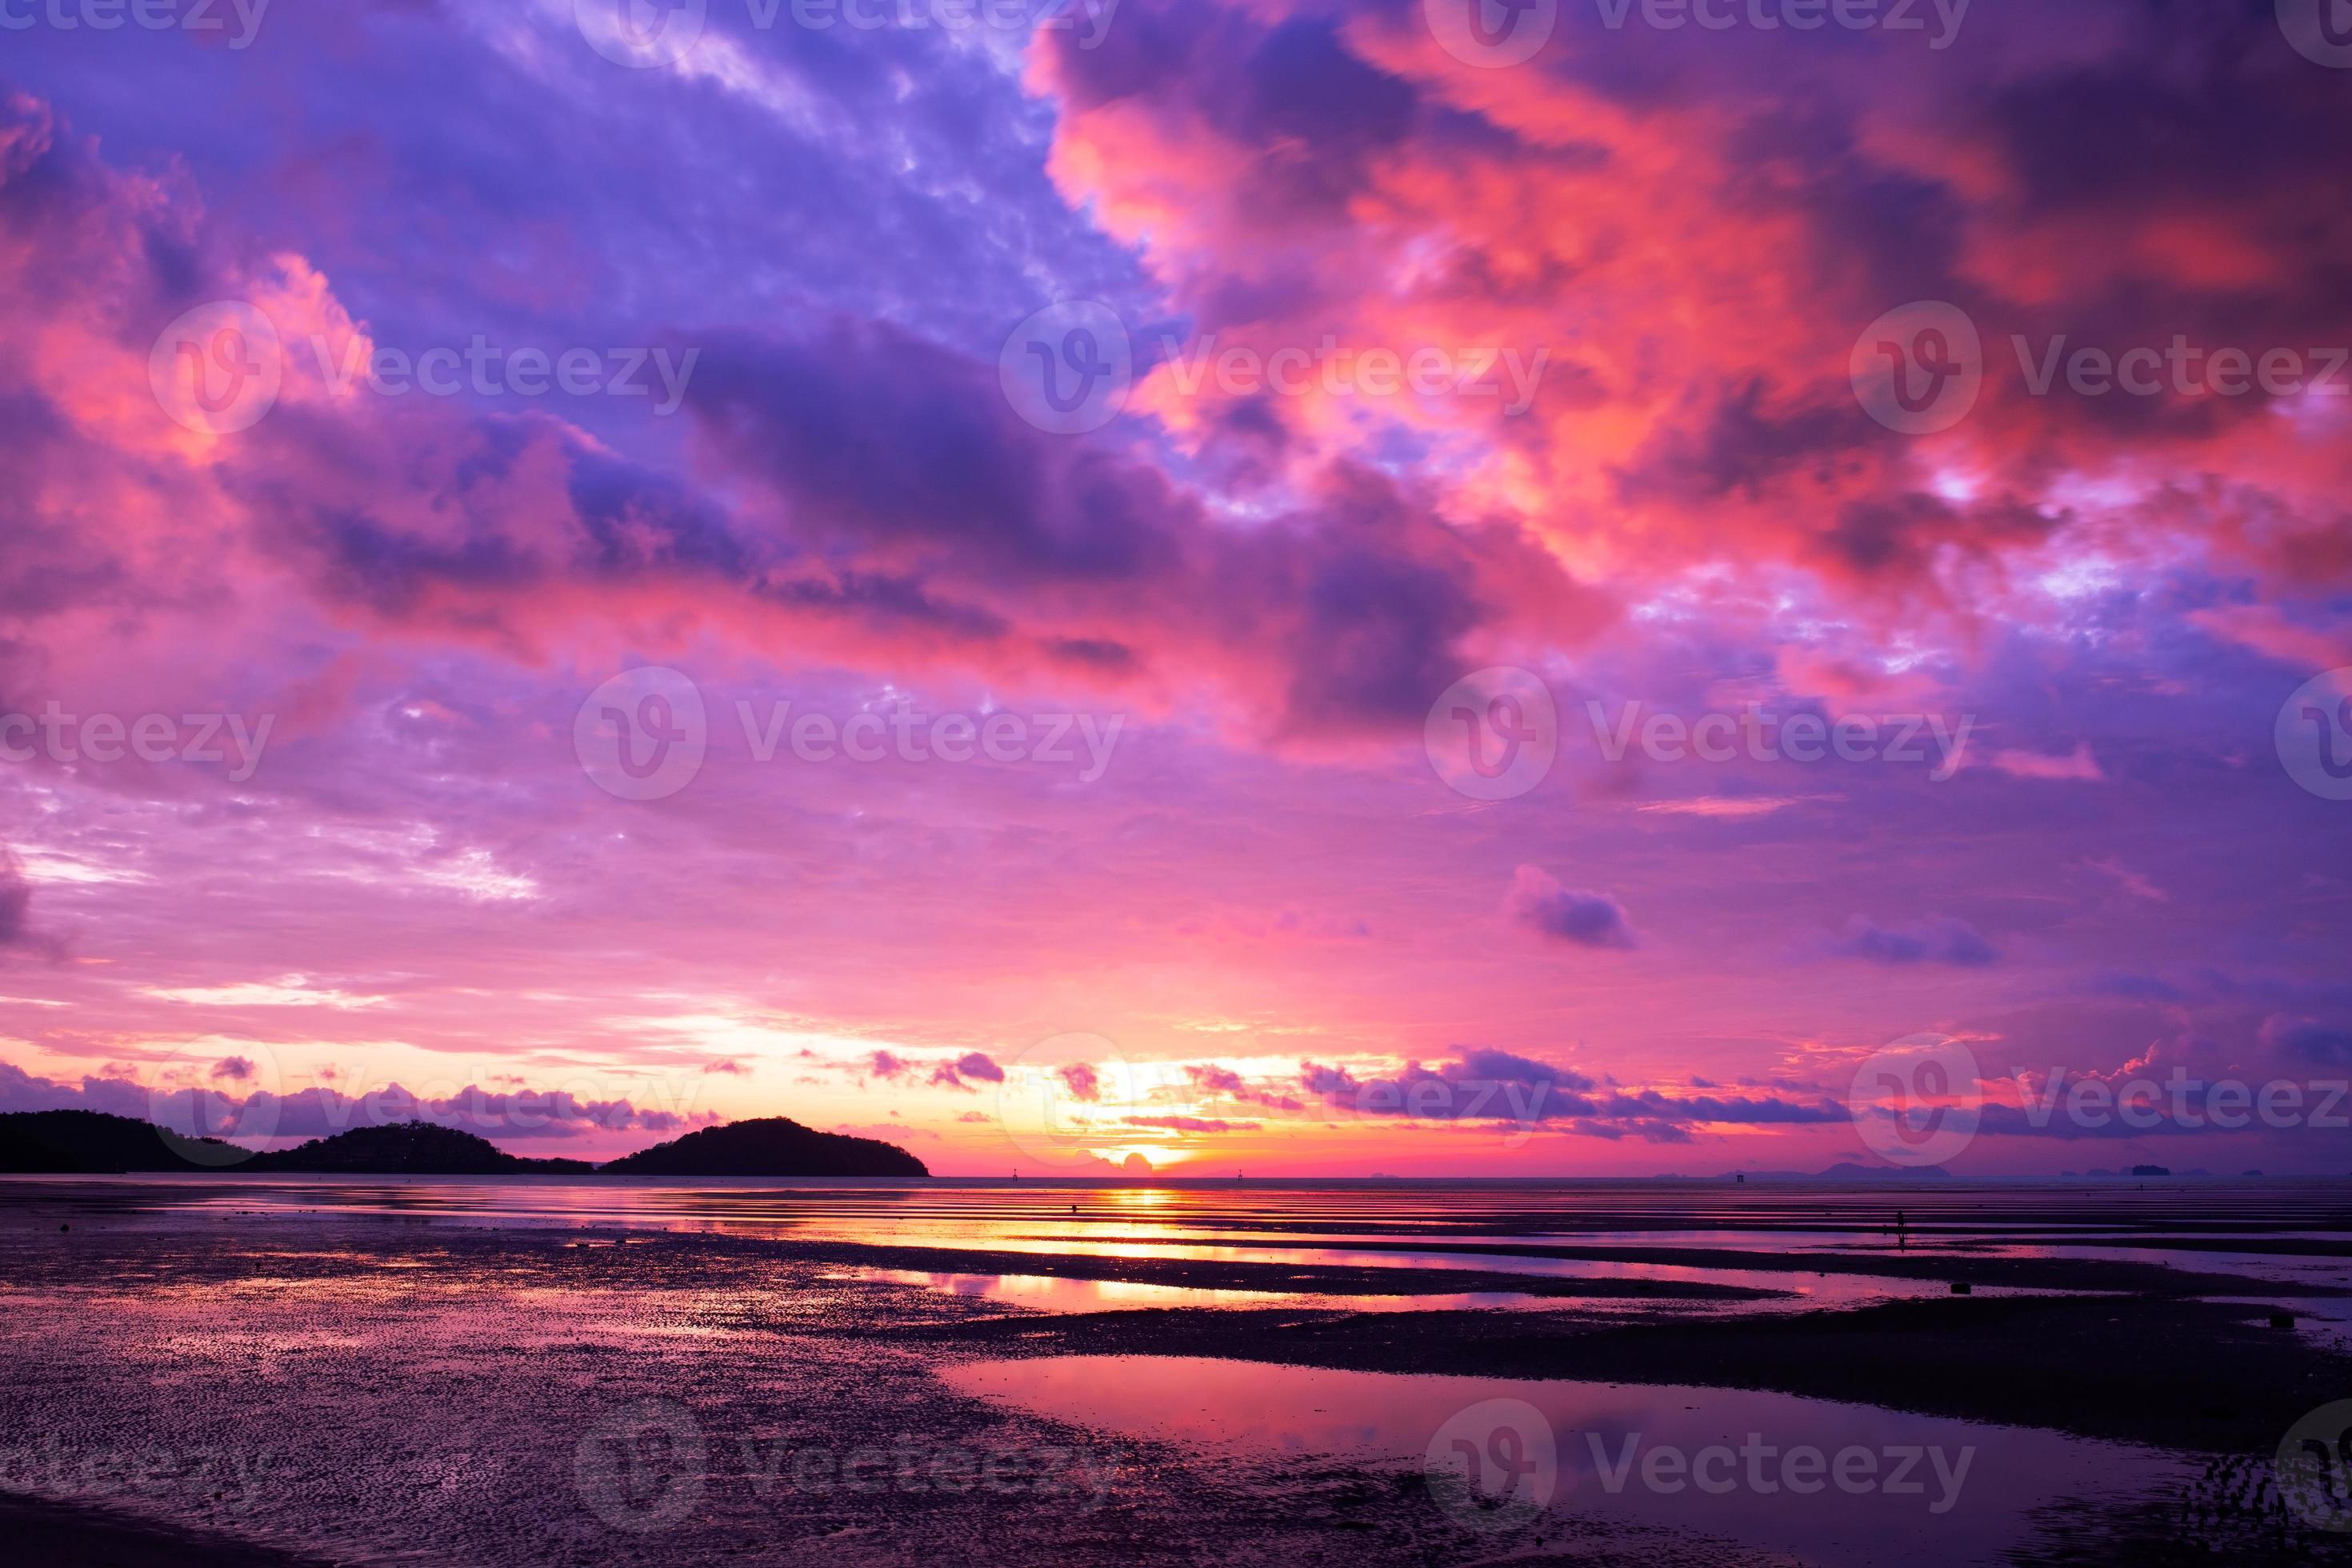 Cyberpunk color trend popular background. Nature beautiful Light Sunset or  sunrise colorful Dramatic majestic scenery Sky with Amazing clouds in sunset  sky purple light cloud over sea background 8111983 Stock Photo at